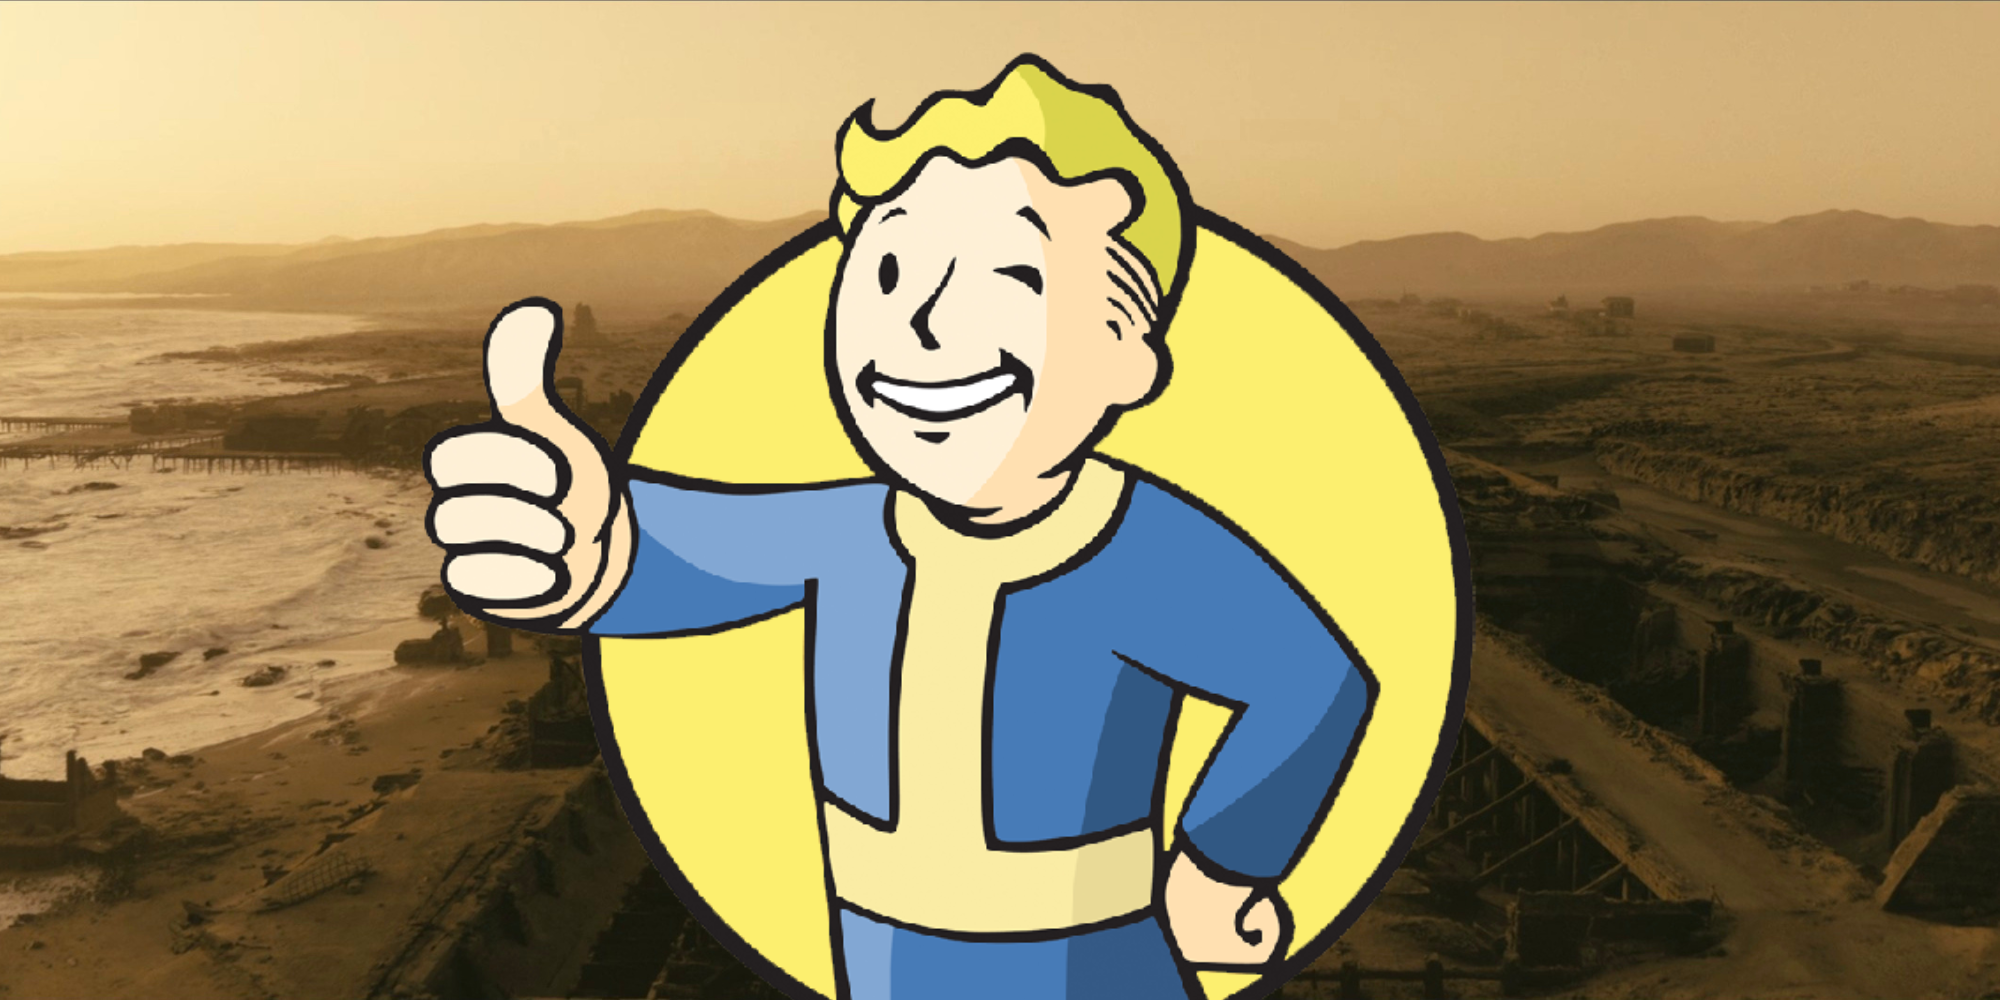 A feature image of Pip Boy logo from Fallout with wastelands in the background